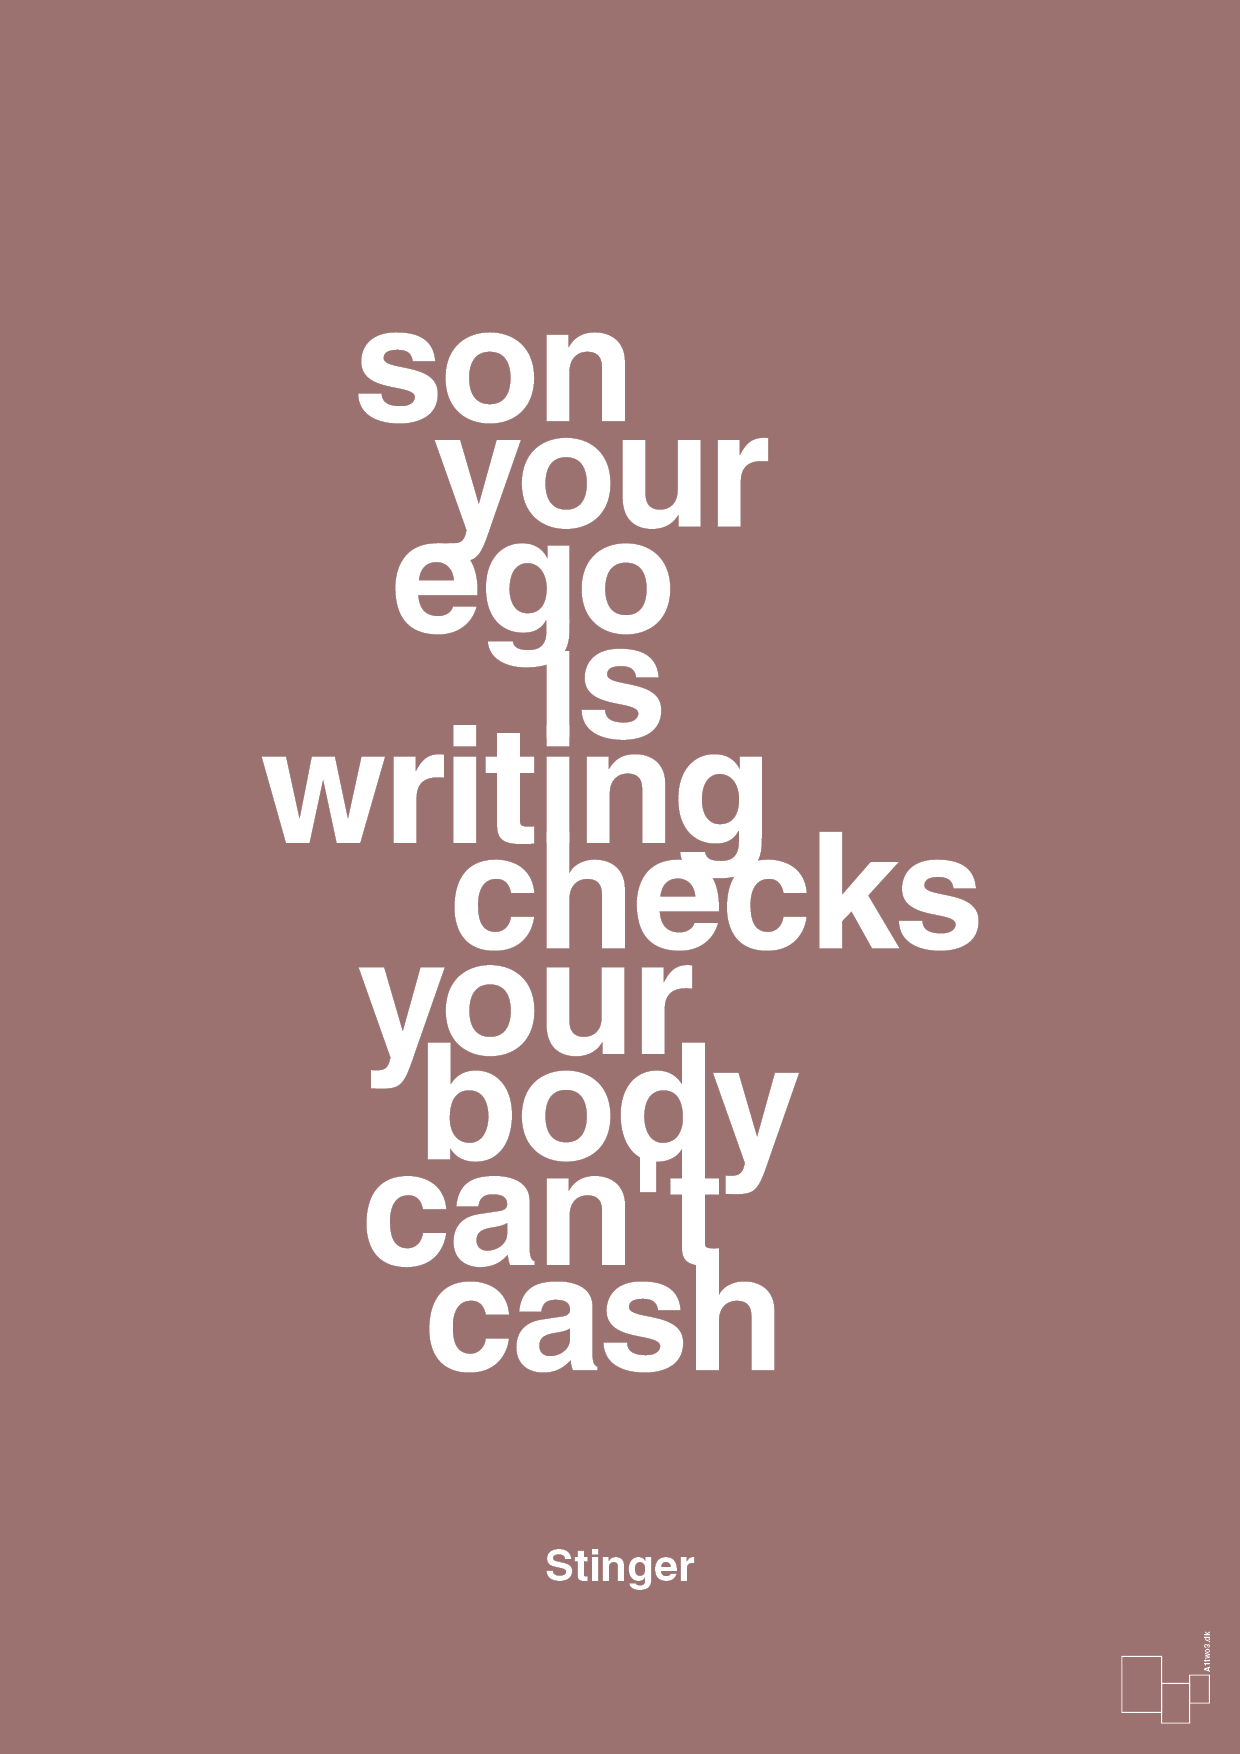 son your ego is writing checks your body can't cash - Plakat med Citater i Plum